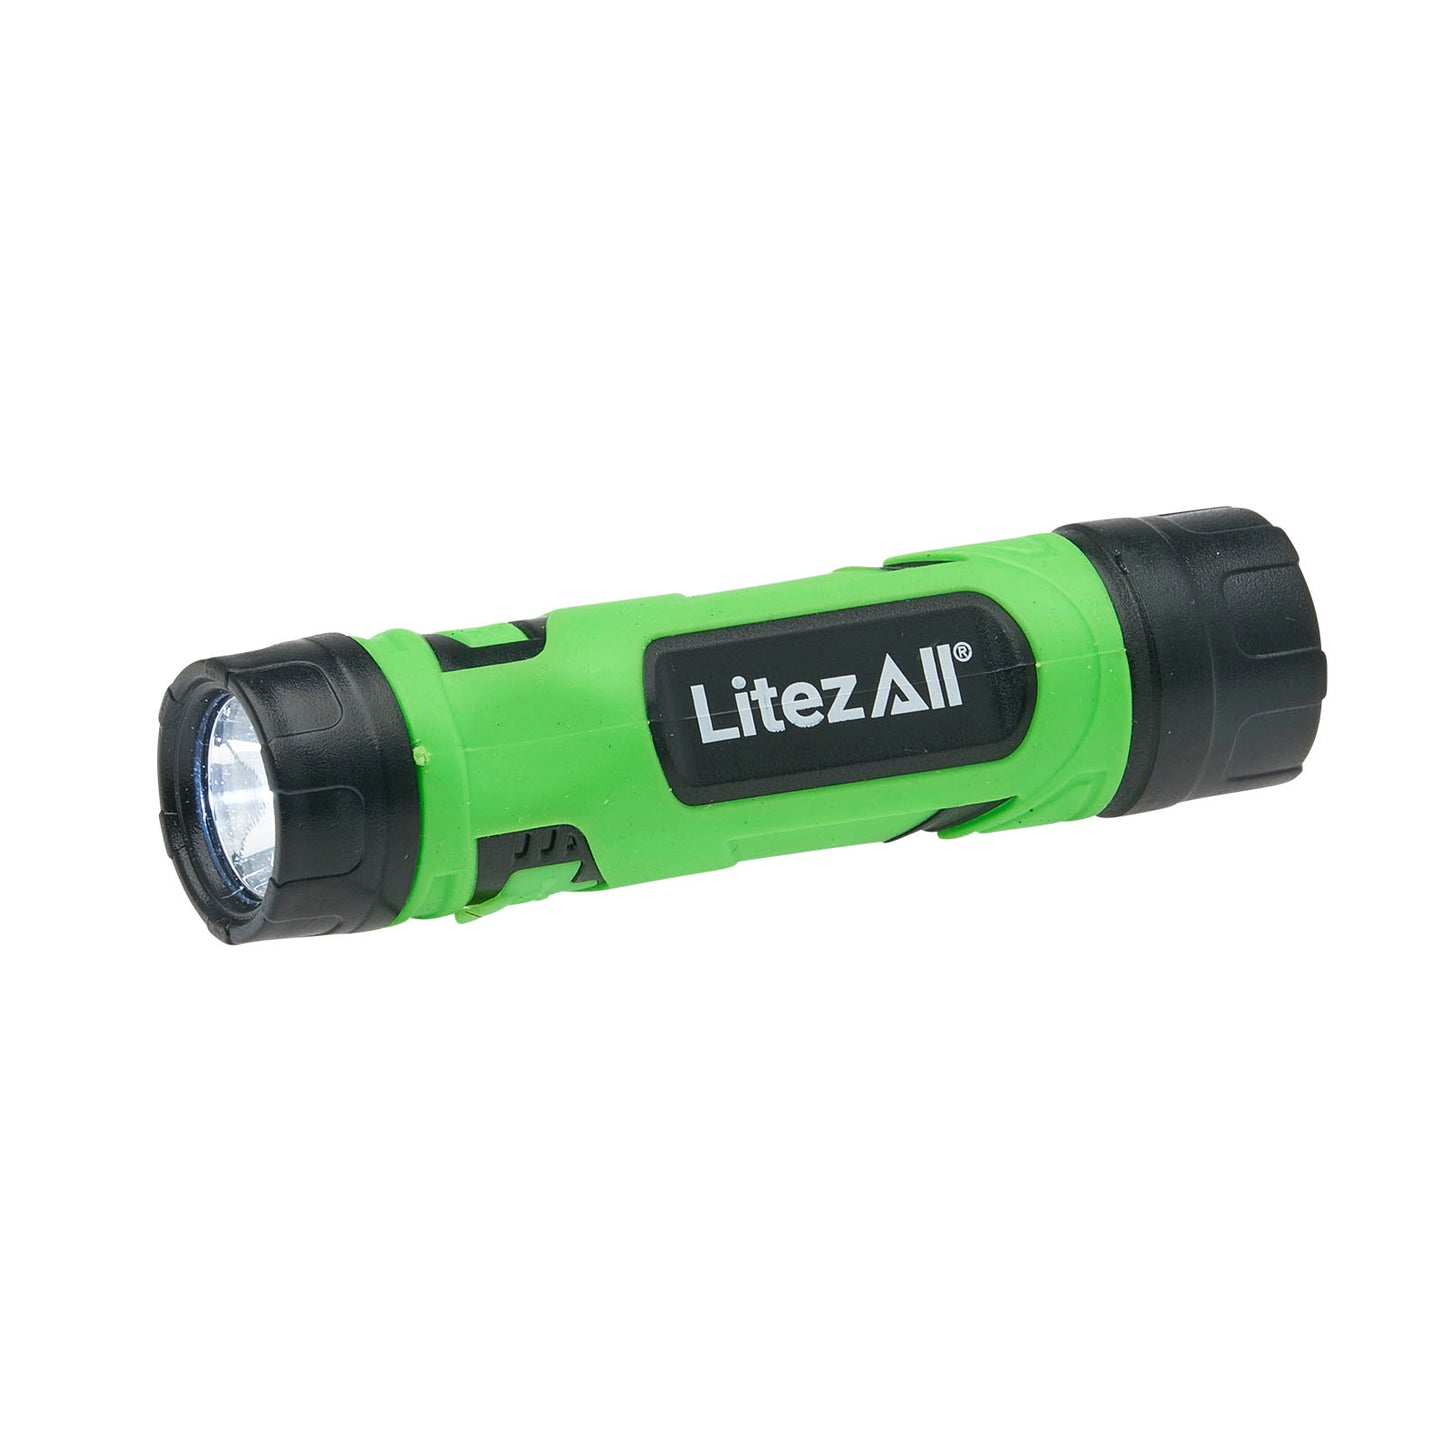 LitezAll 25515 Rechargeable Neck Light with Detachable Flashlights